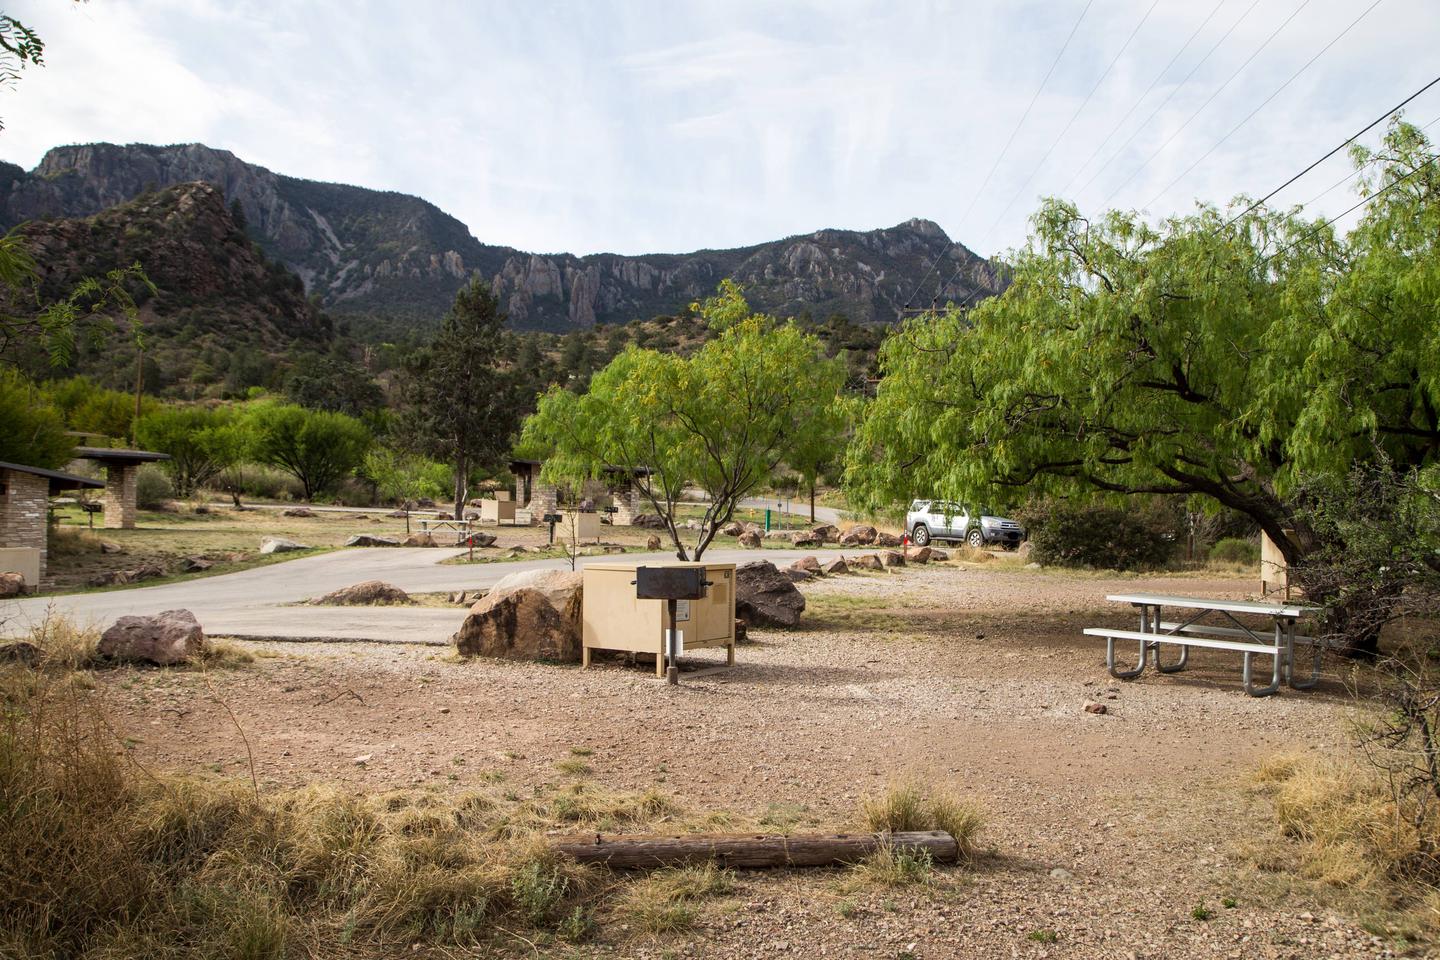 Chisos Basin Campsite #27 overall viewView showing parking area, bear box, grill, and picnic table